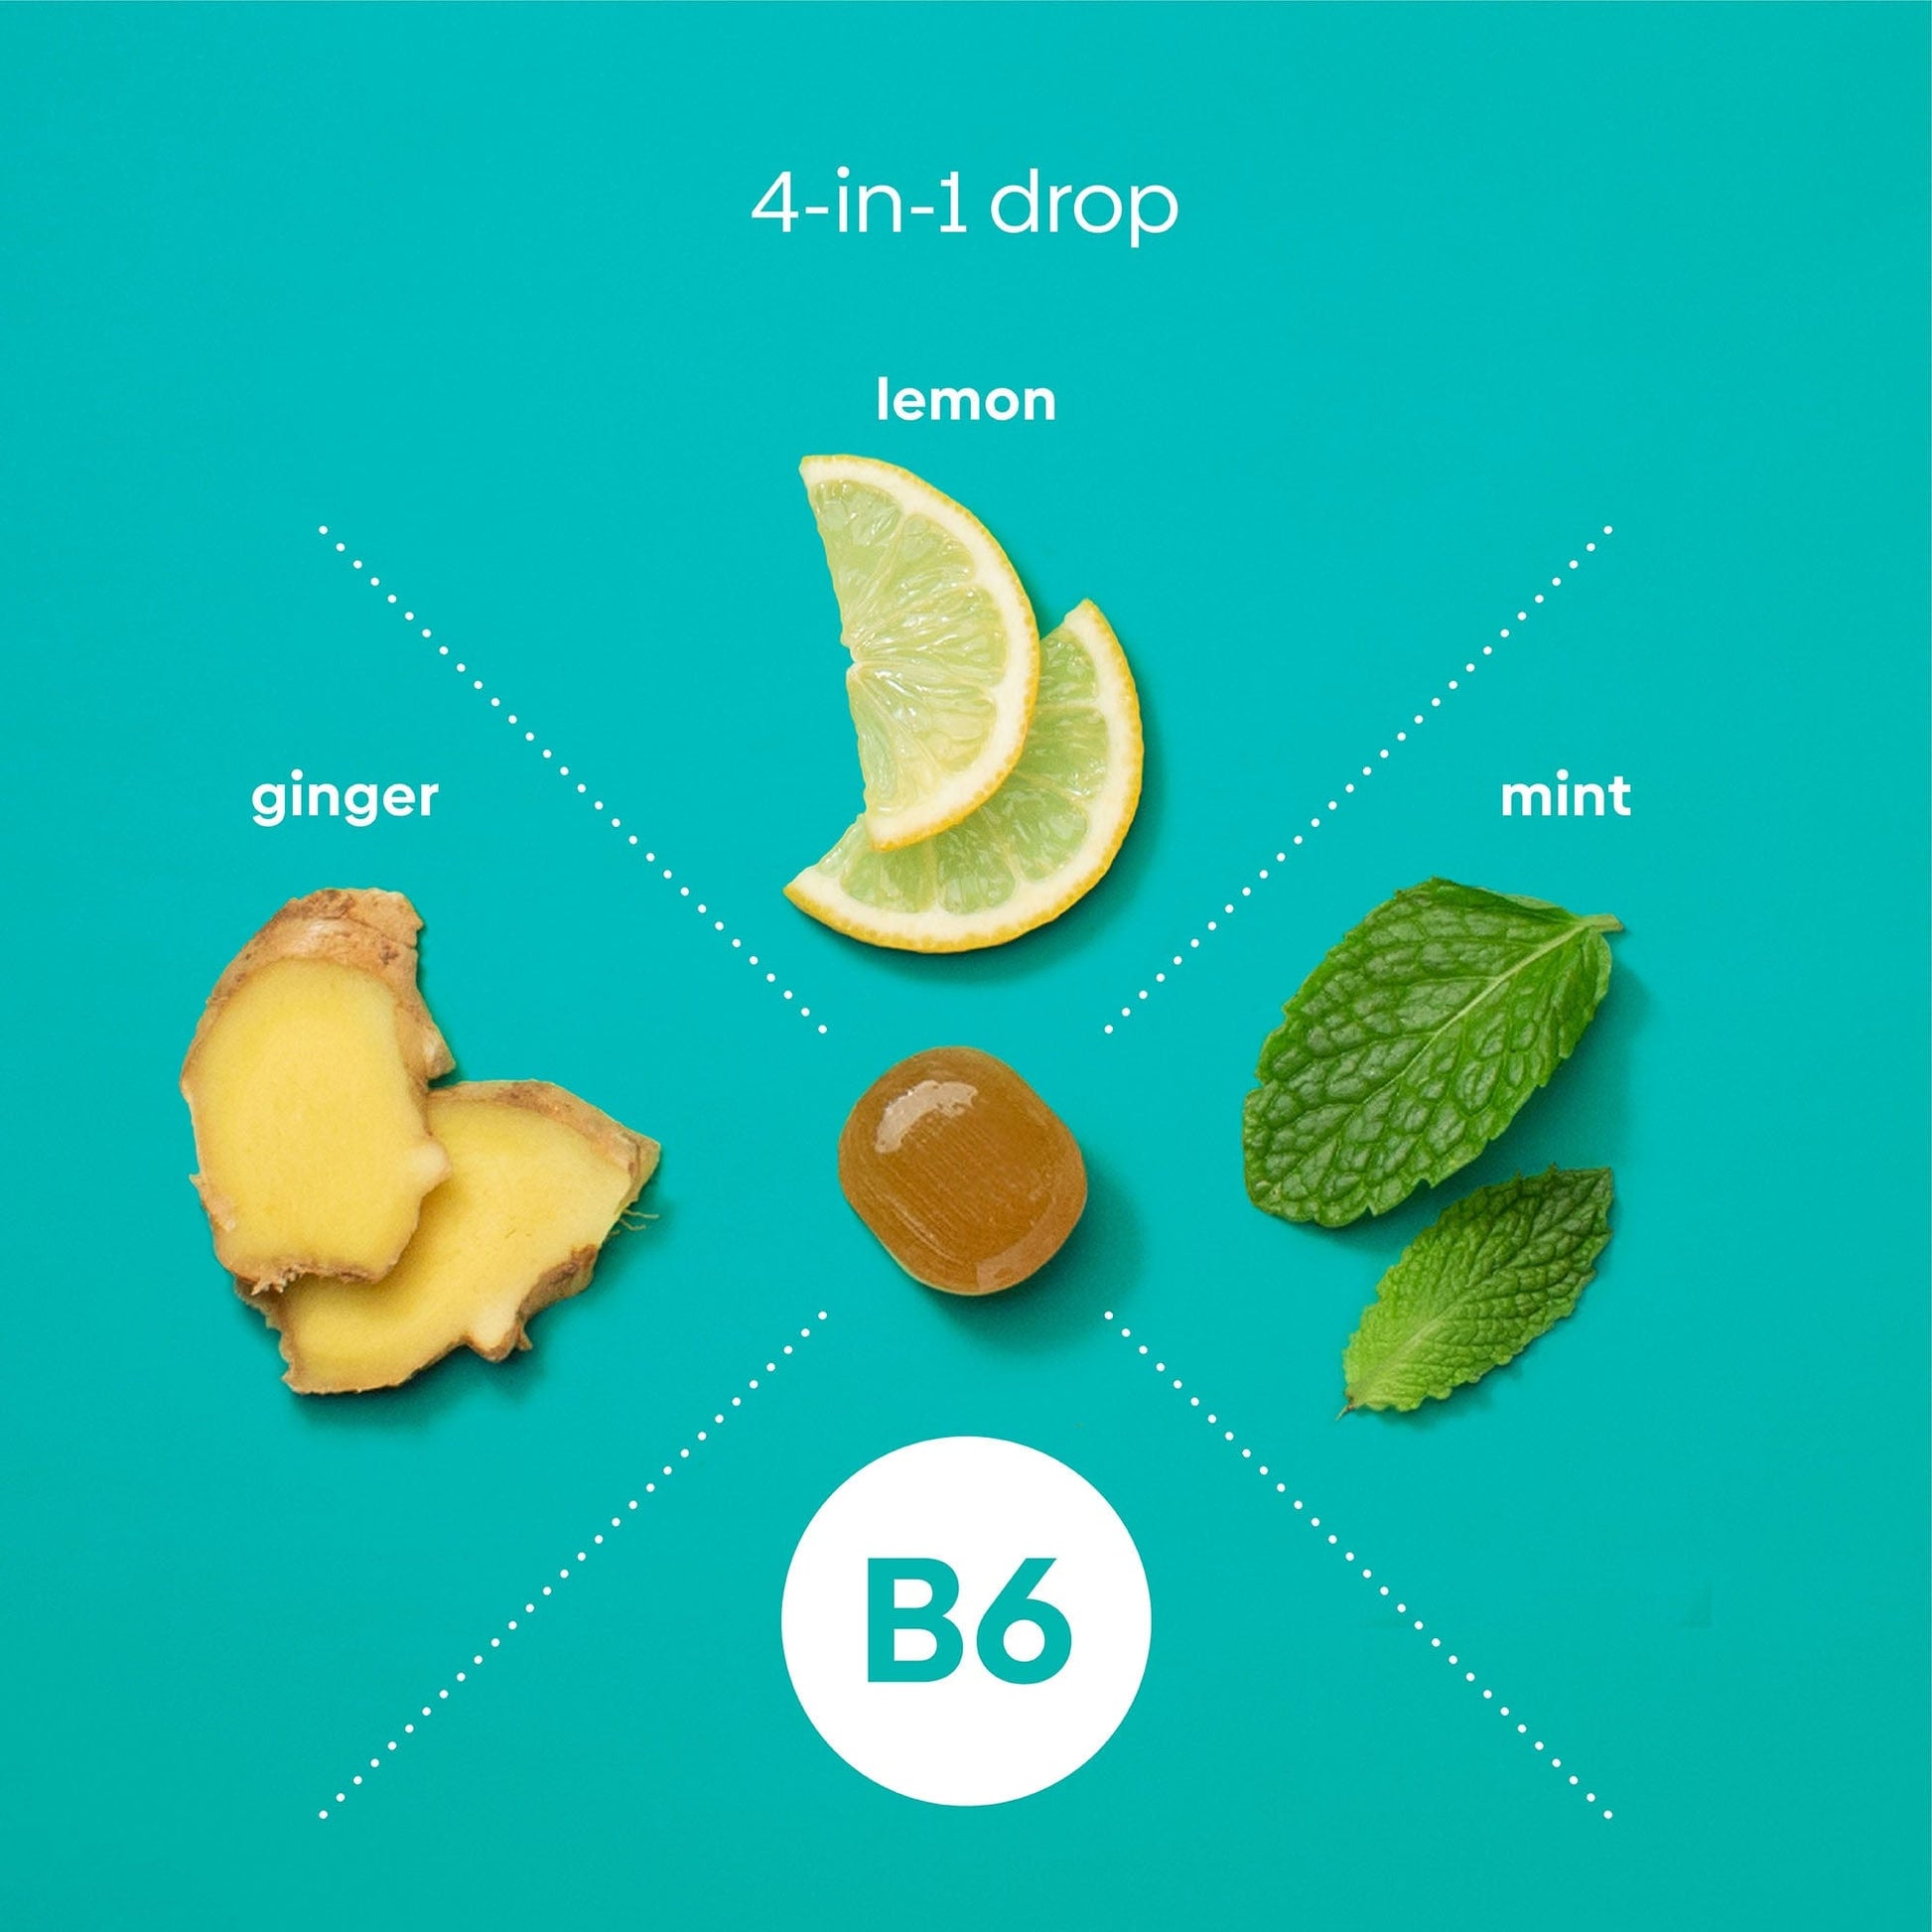 Ingredients in Stomach Settle are shown on a teal background